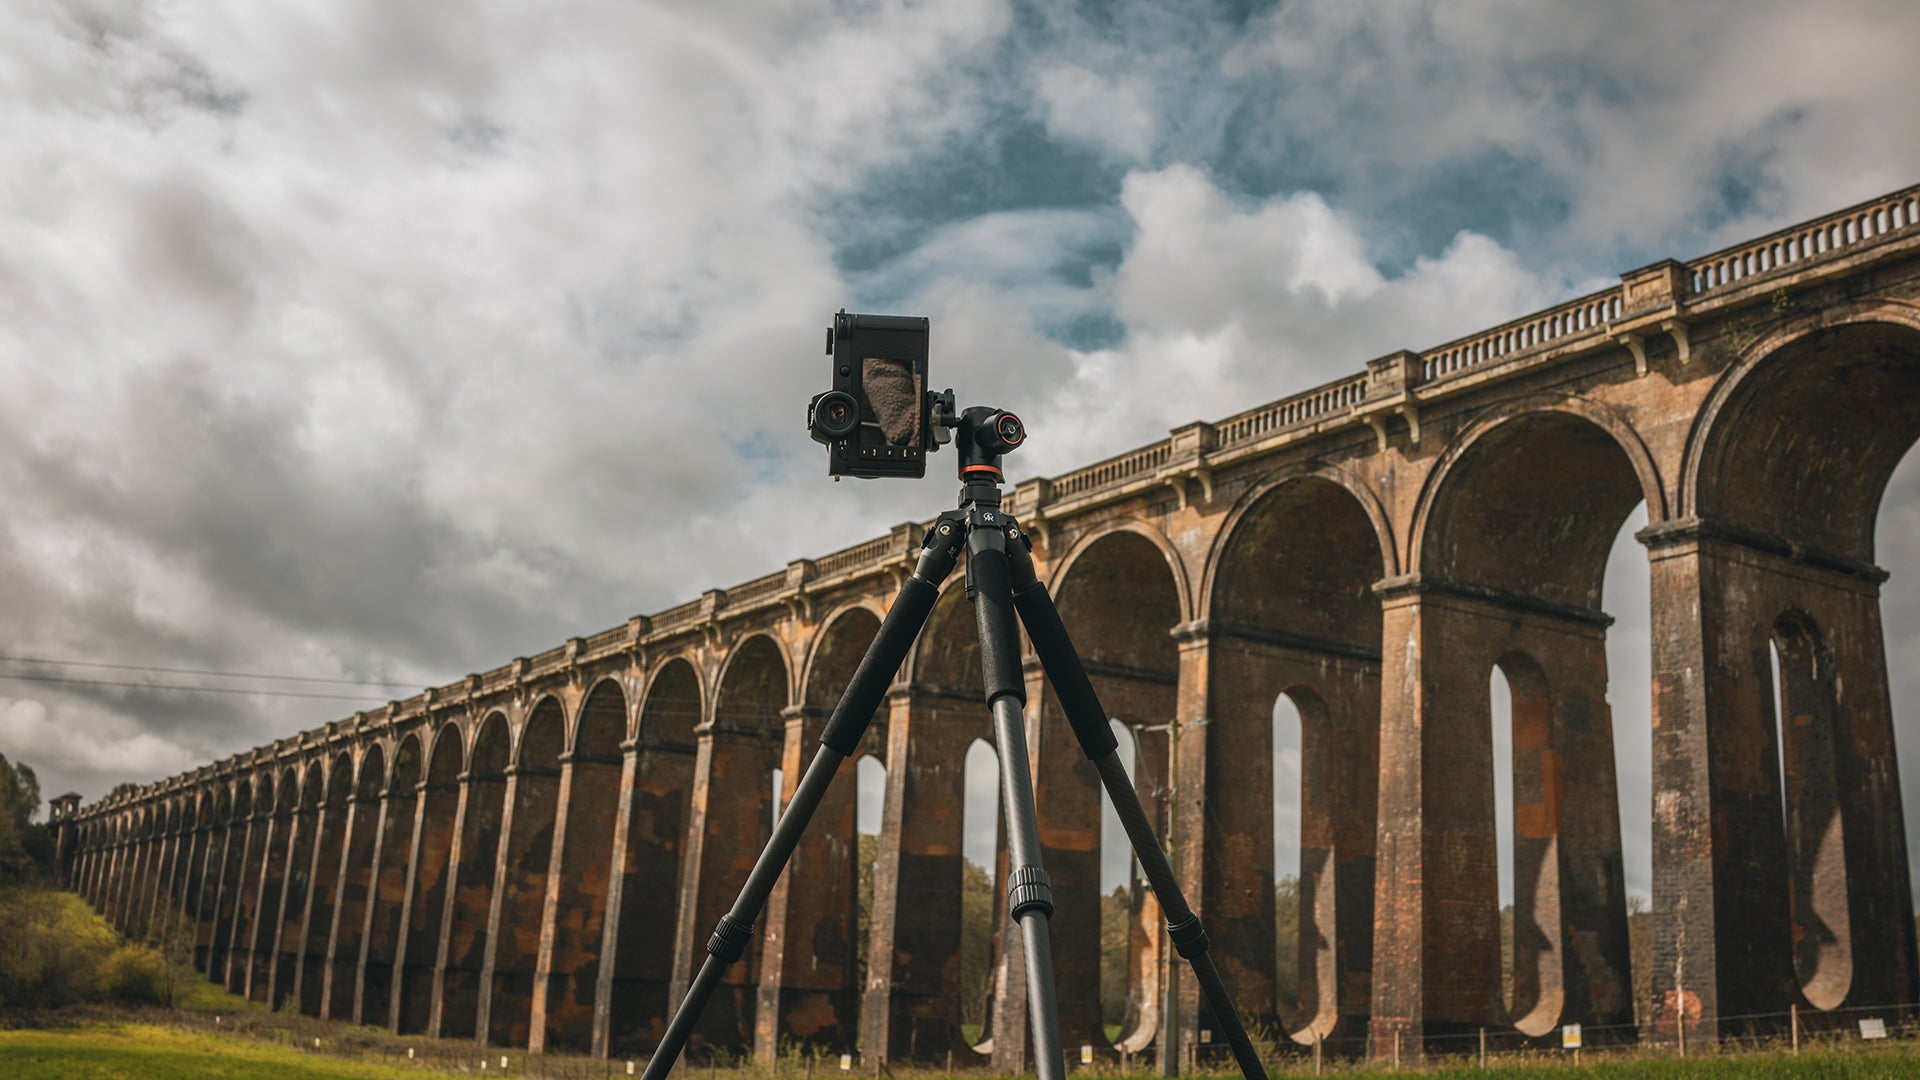 Time-lapses with Gearing - A trip to Balcombe Viaduct